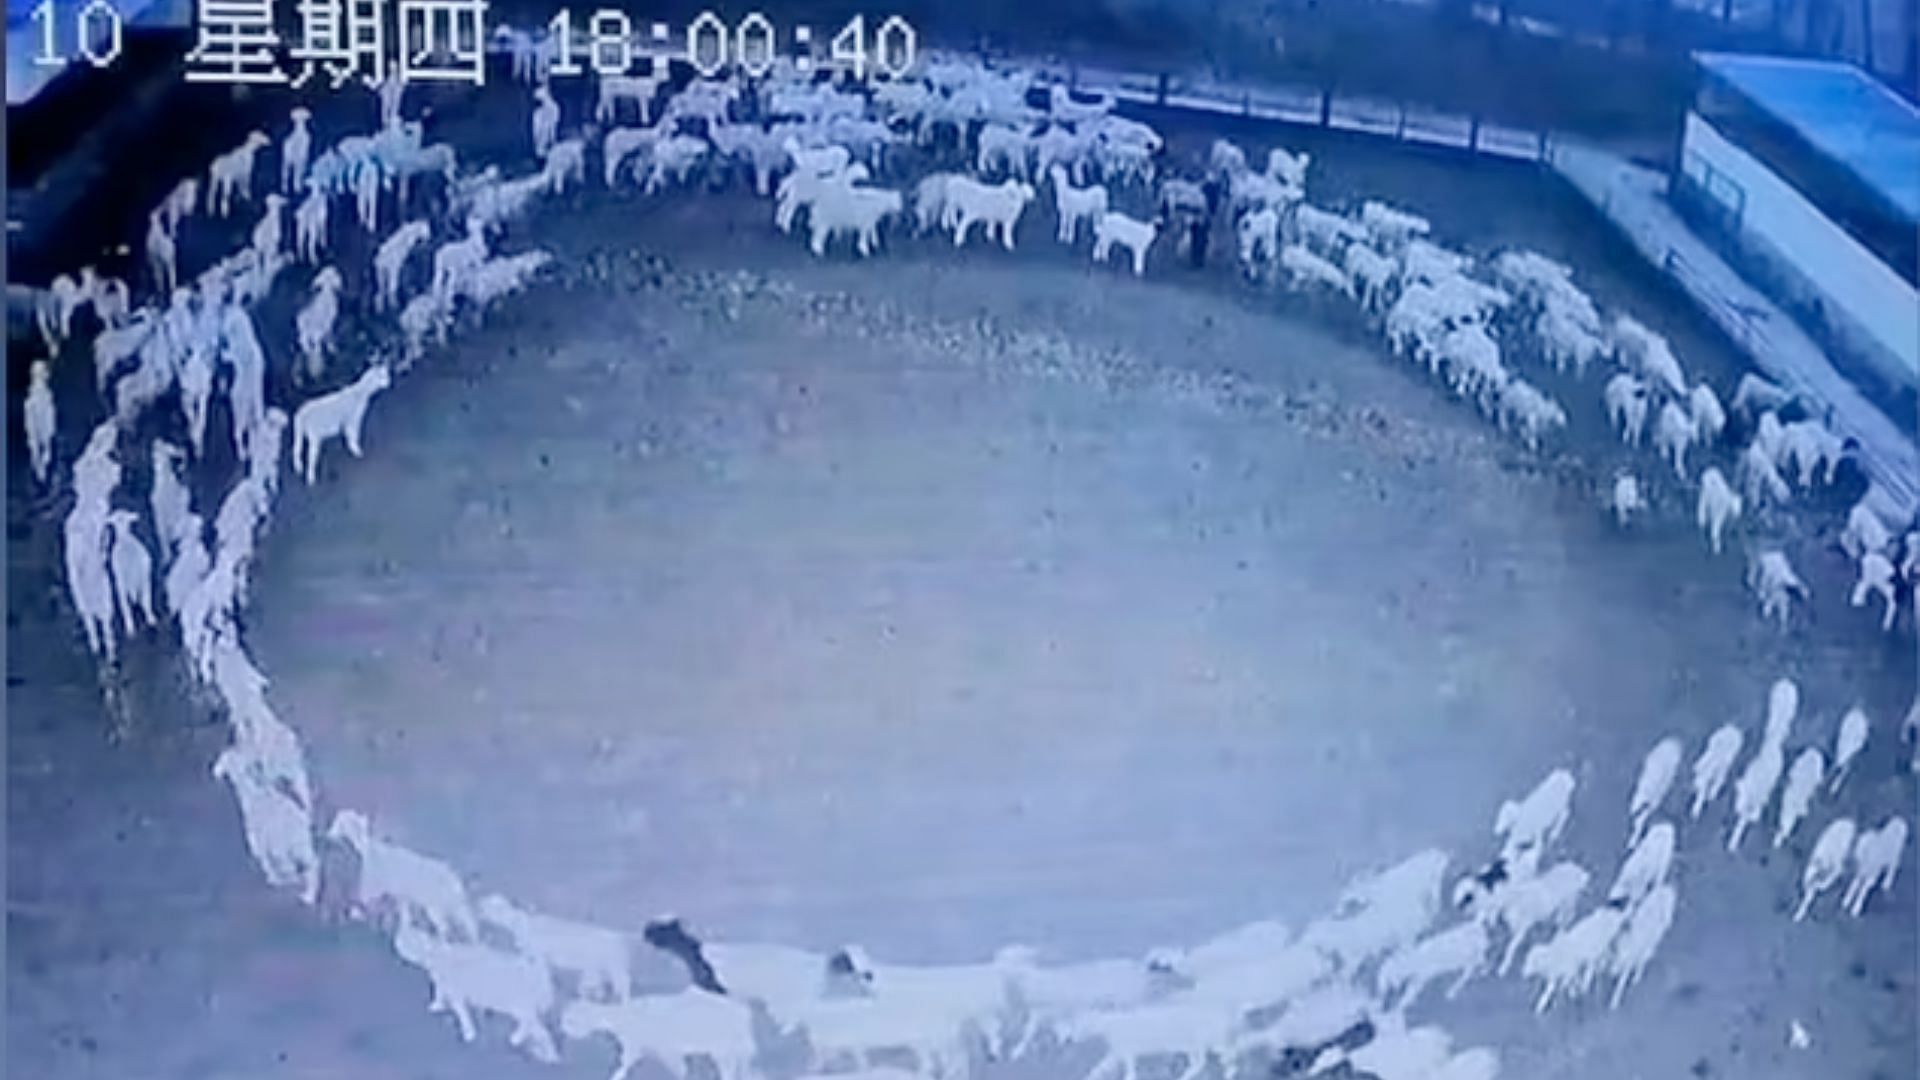 The portal will be open soon": Sheep walking in circles meaning explored as eerie China video goes viral